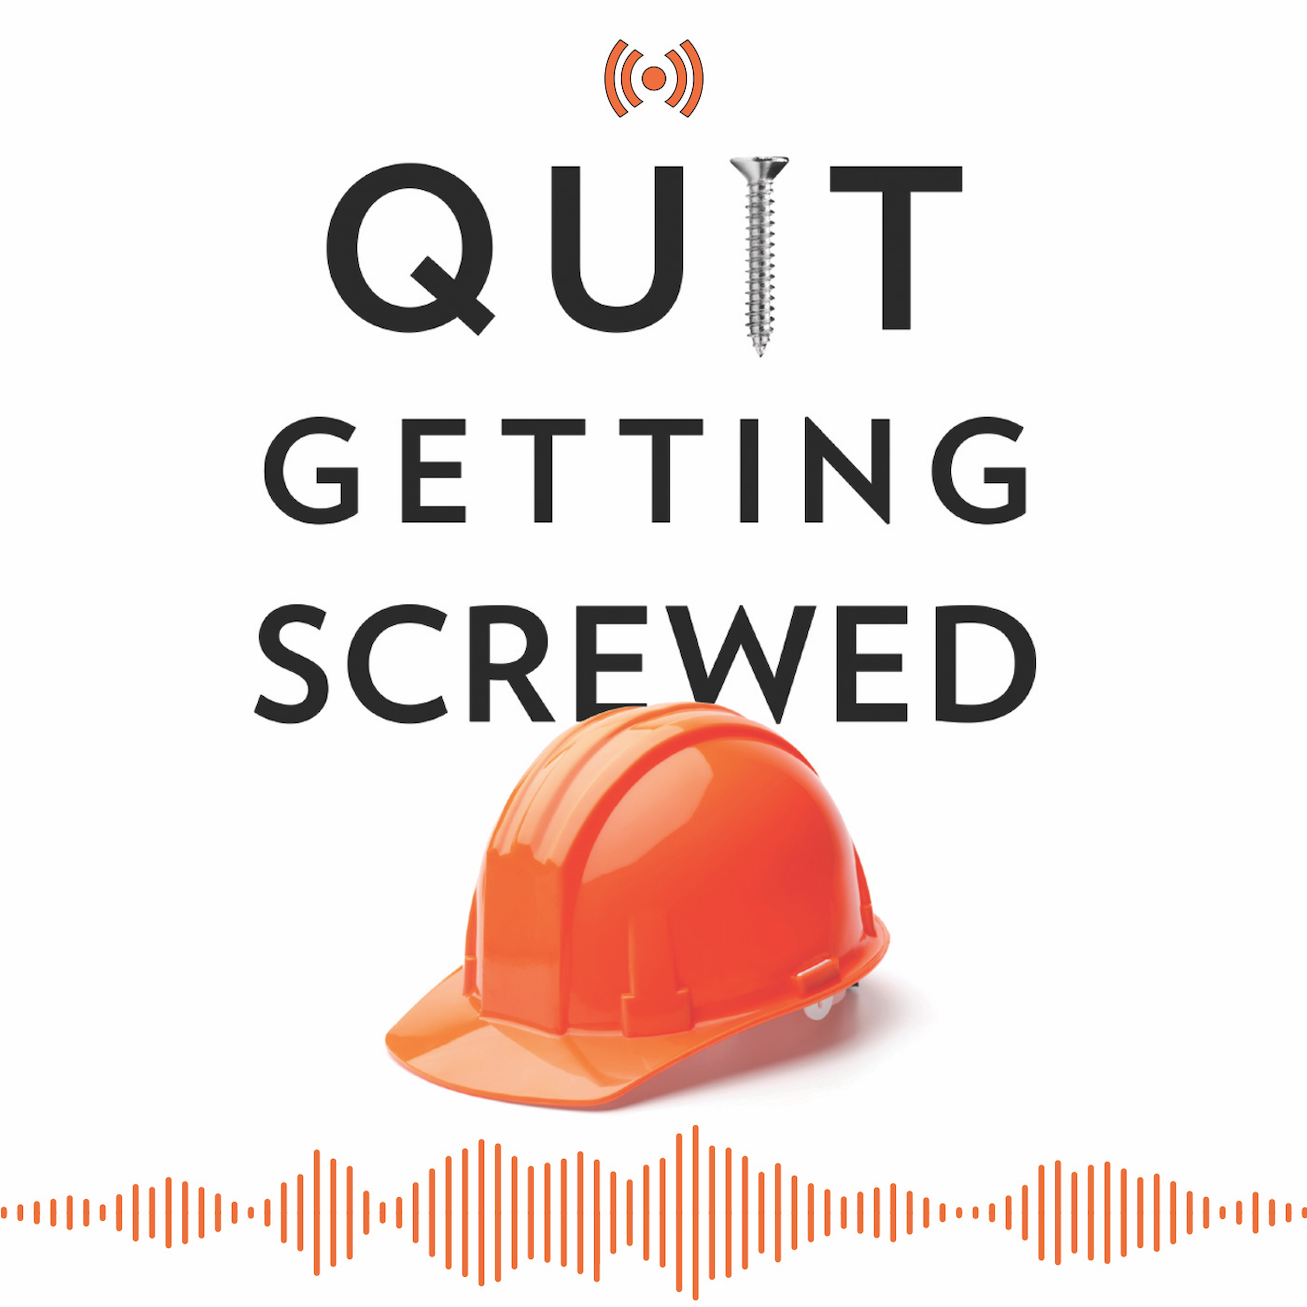 Episode 9: Subcontractor or Employee? (With Kelly Stamy)